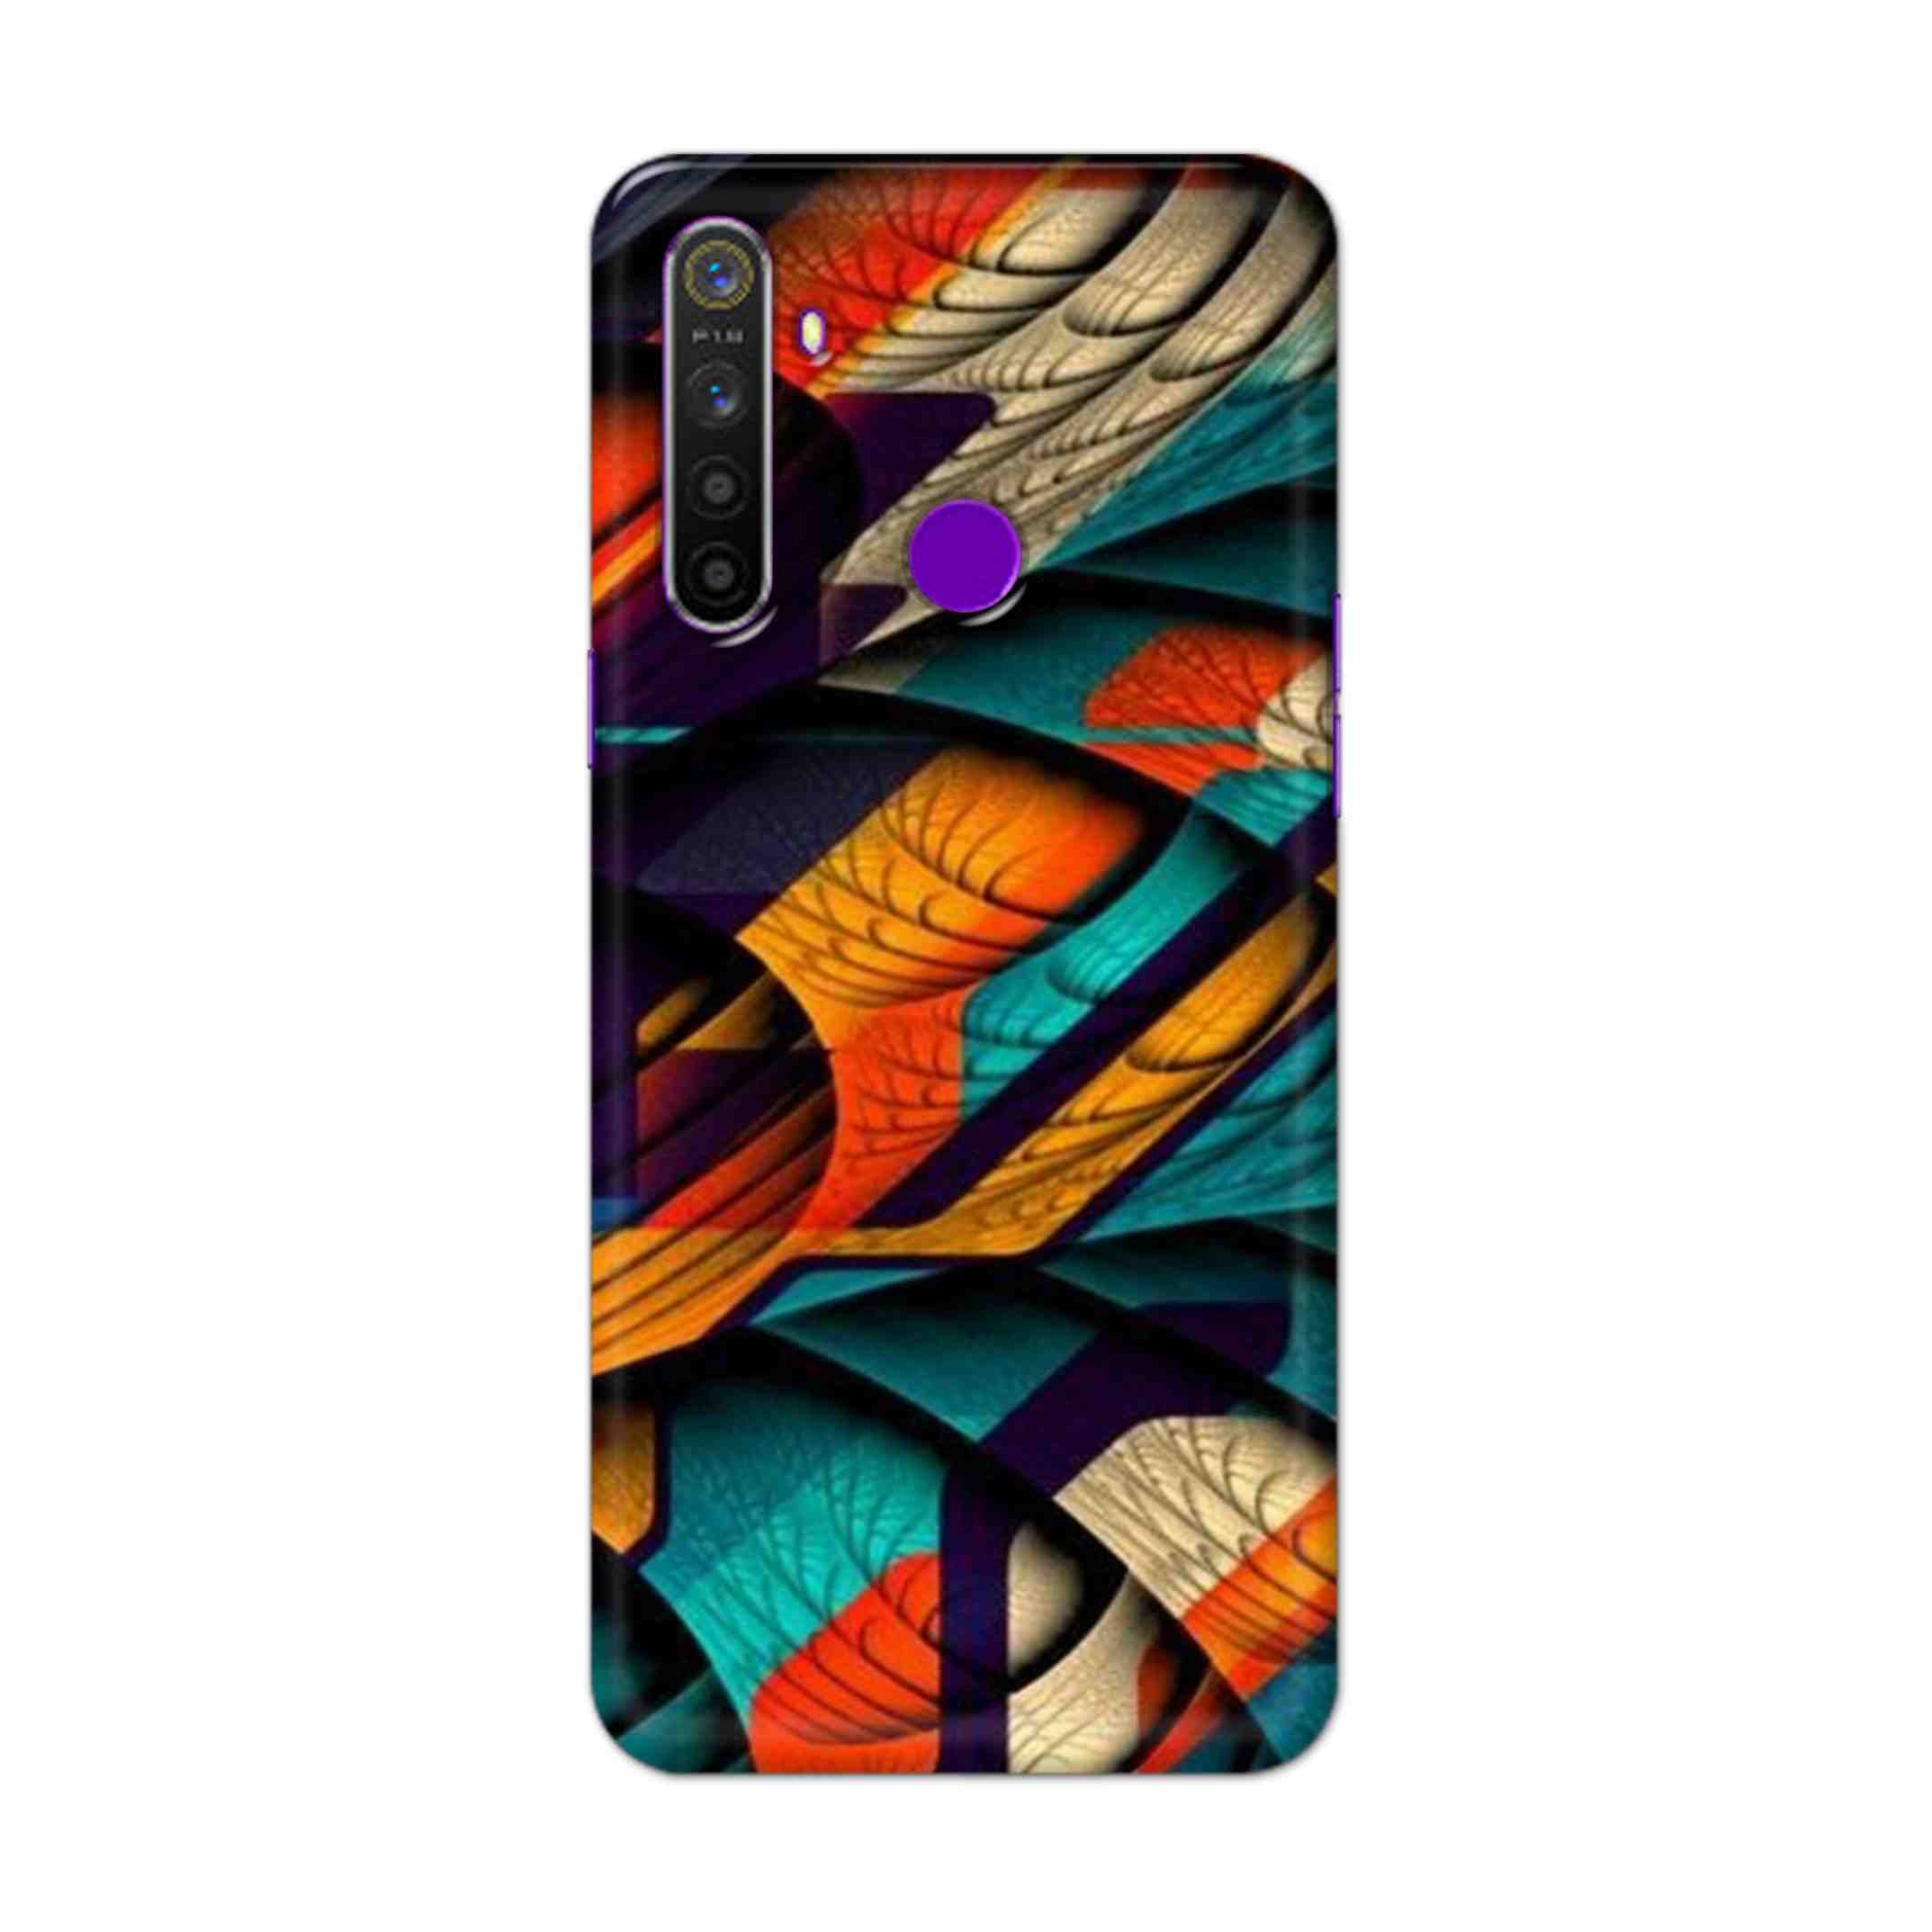 Buy Colour Abstract Hard Back Mobile Phone Case Cover For Realme 5 Pro Online